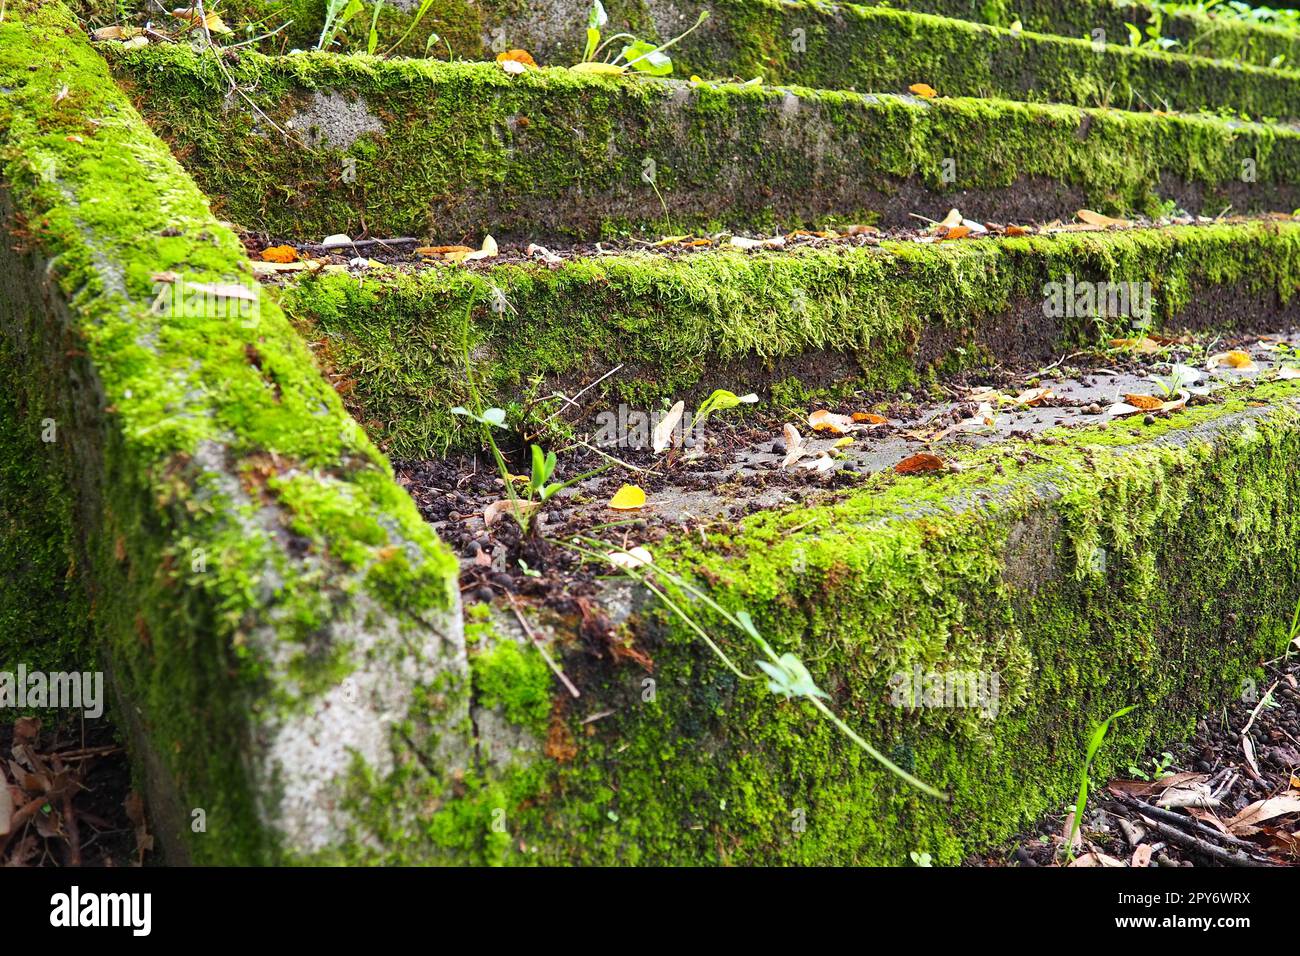 Outdoor staircase covered in moss, mold and other vegetation. Banja Koviljaca, Loznica, Serbia. Ruins of a building. Stock Photo